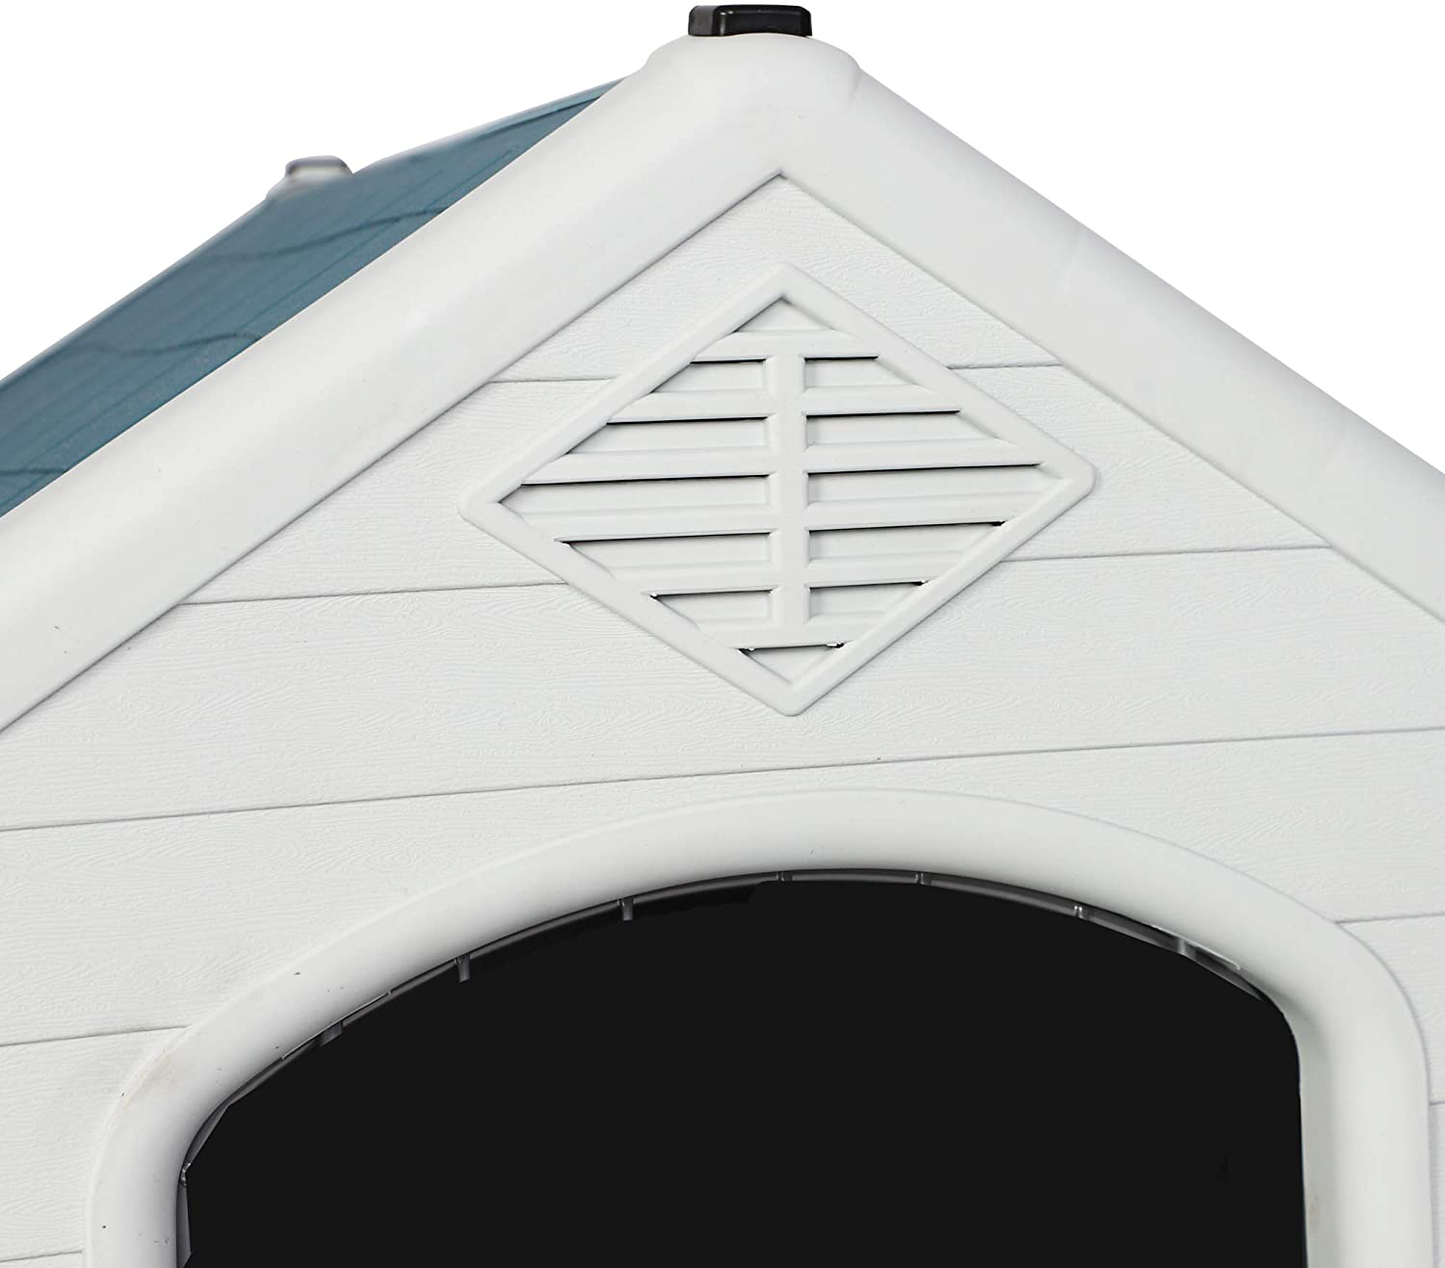 LONABR Plastic Outdoor Dog House for Pet Weatherproof Kennel Small to Large Size,Blue & White